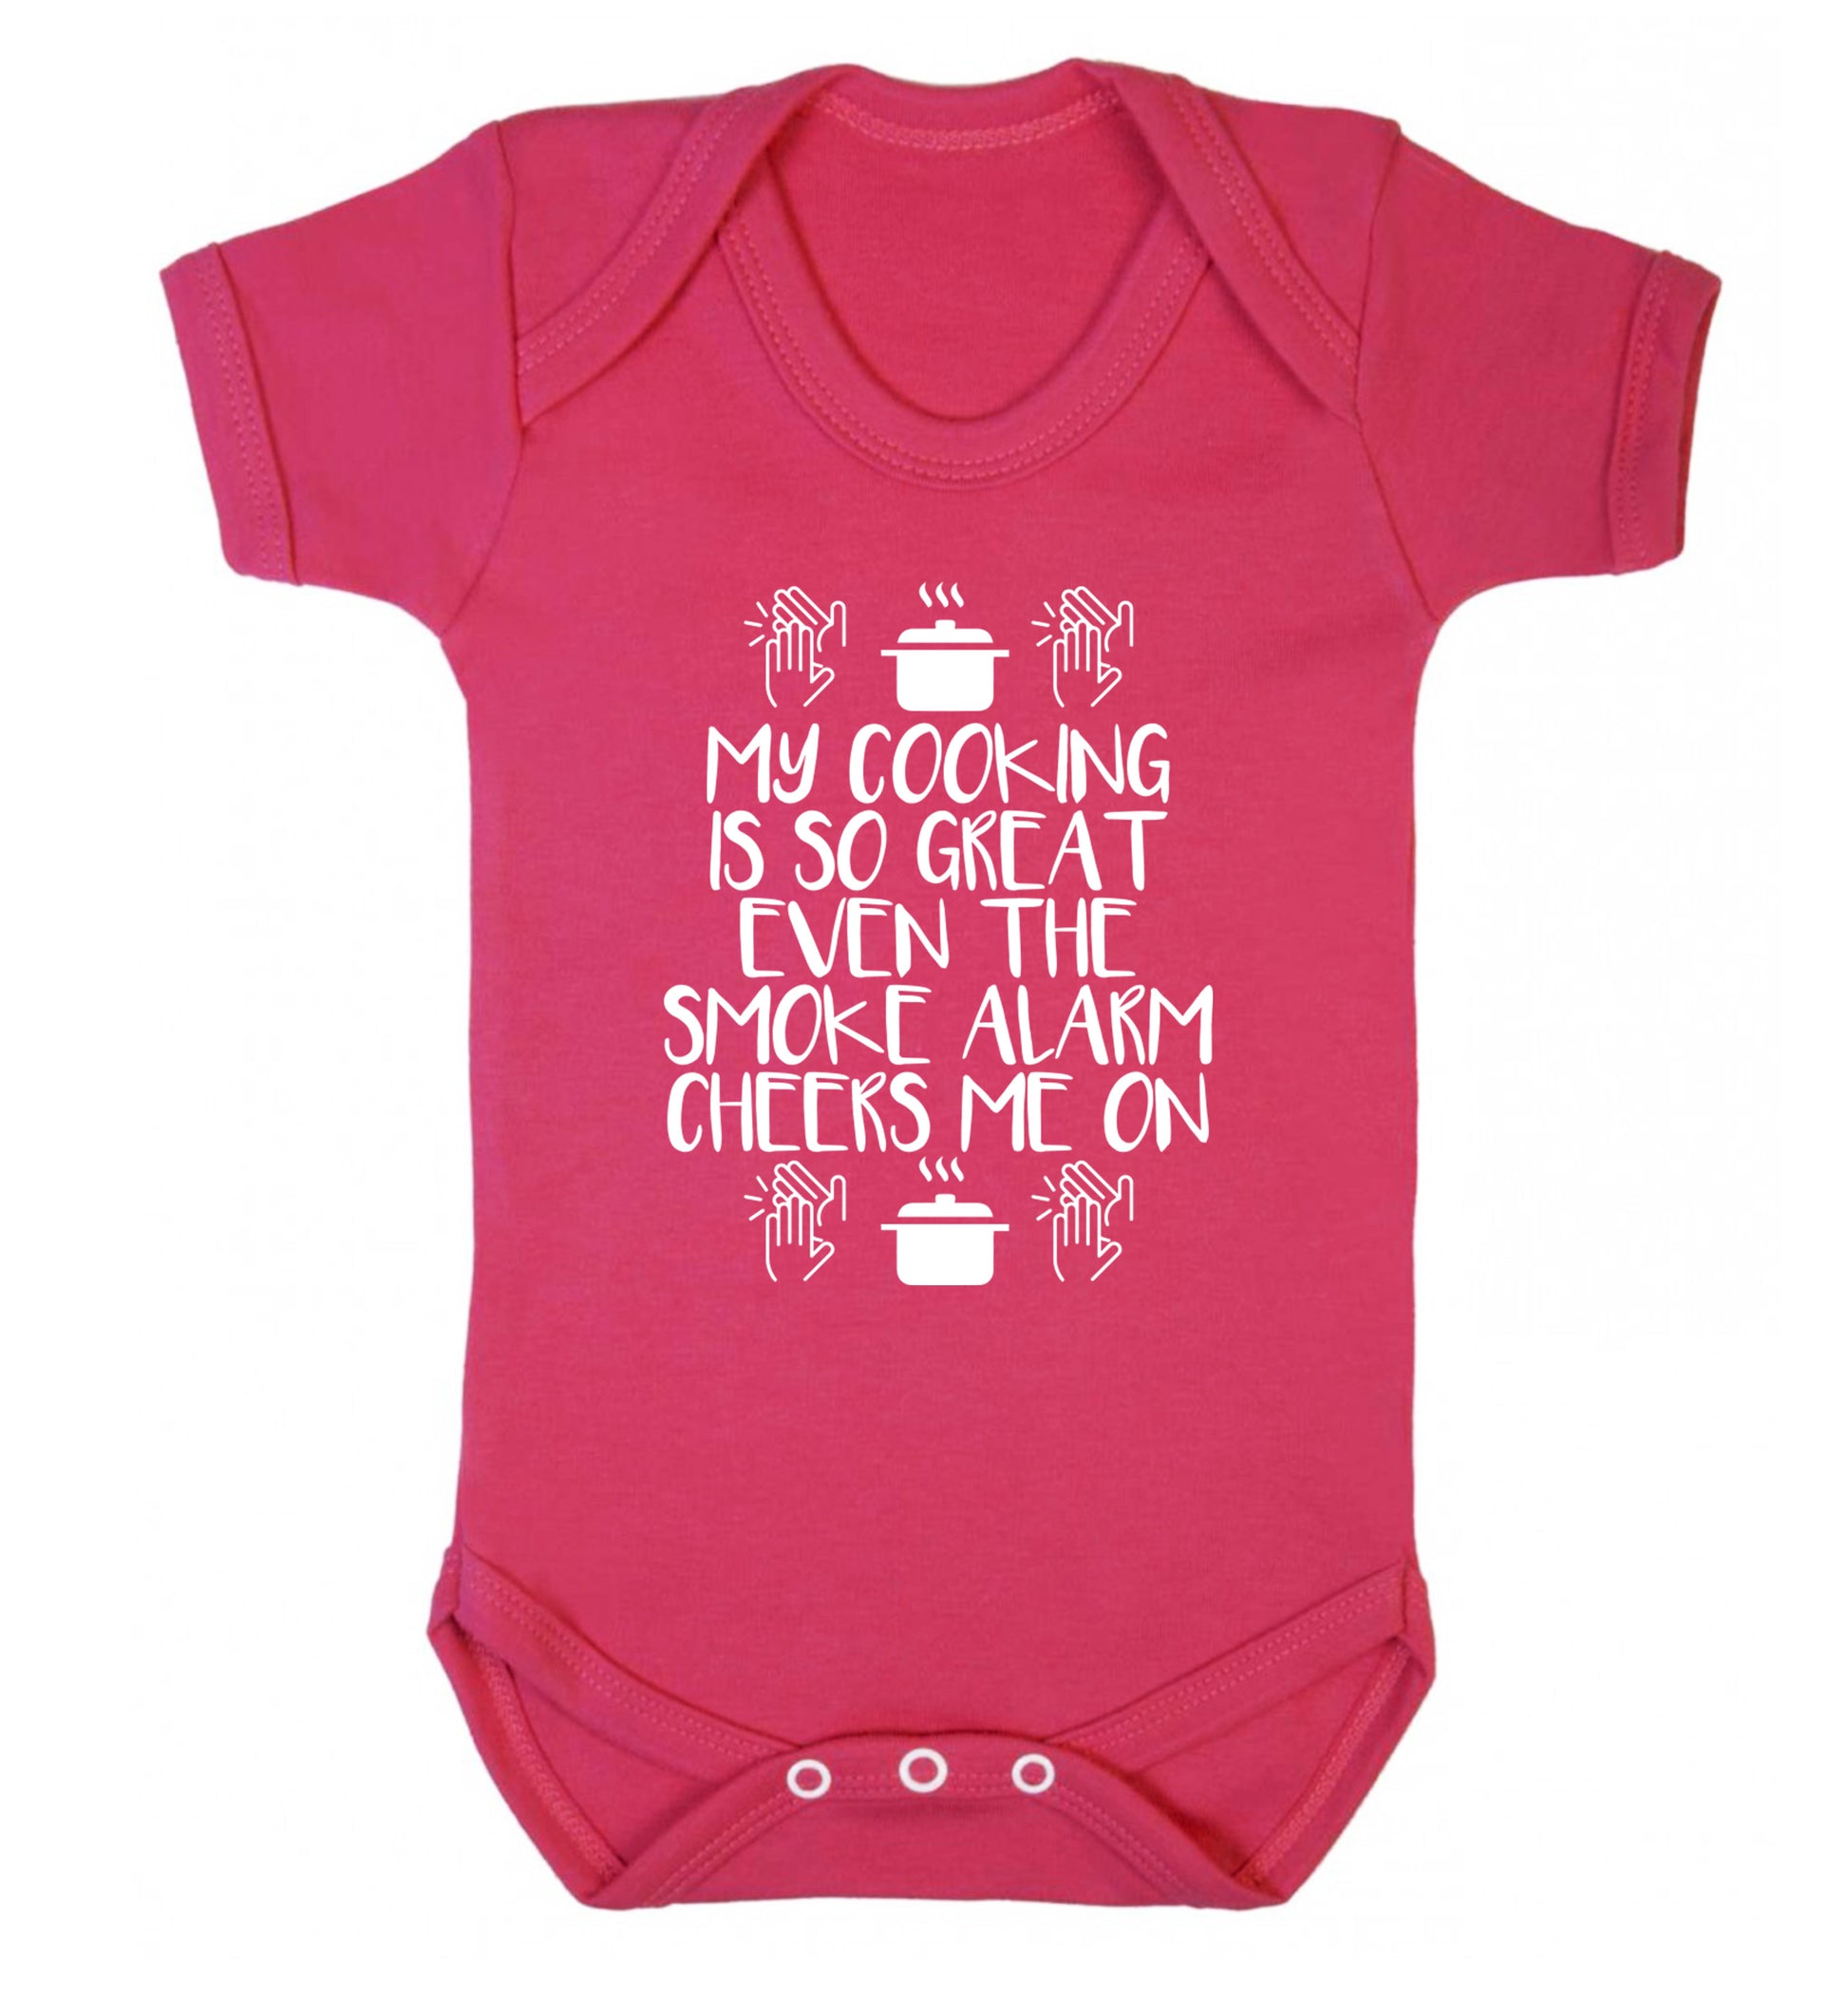 My cooking is so great even the smoke alarm cheers me on! Baby Vest dark pink 18-24 months